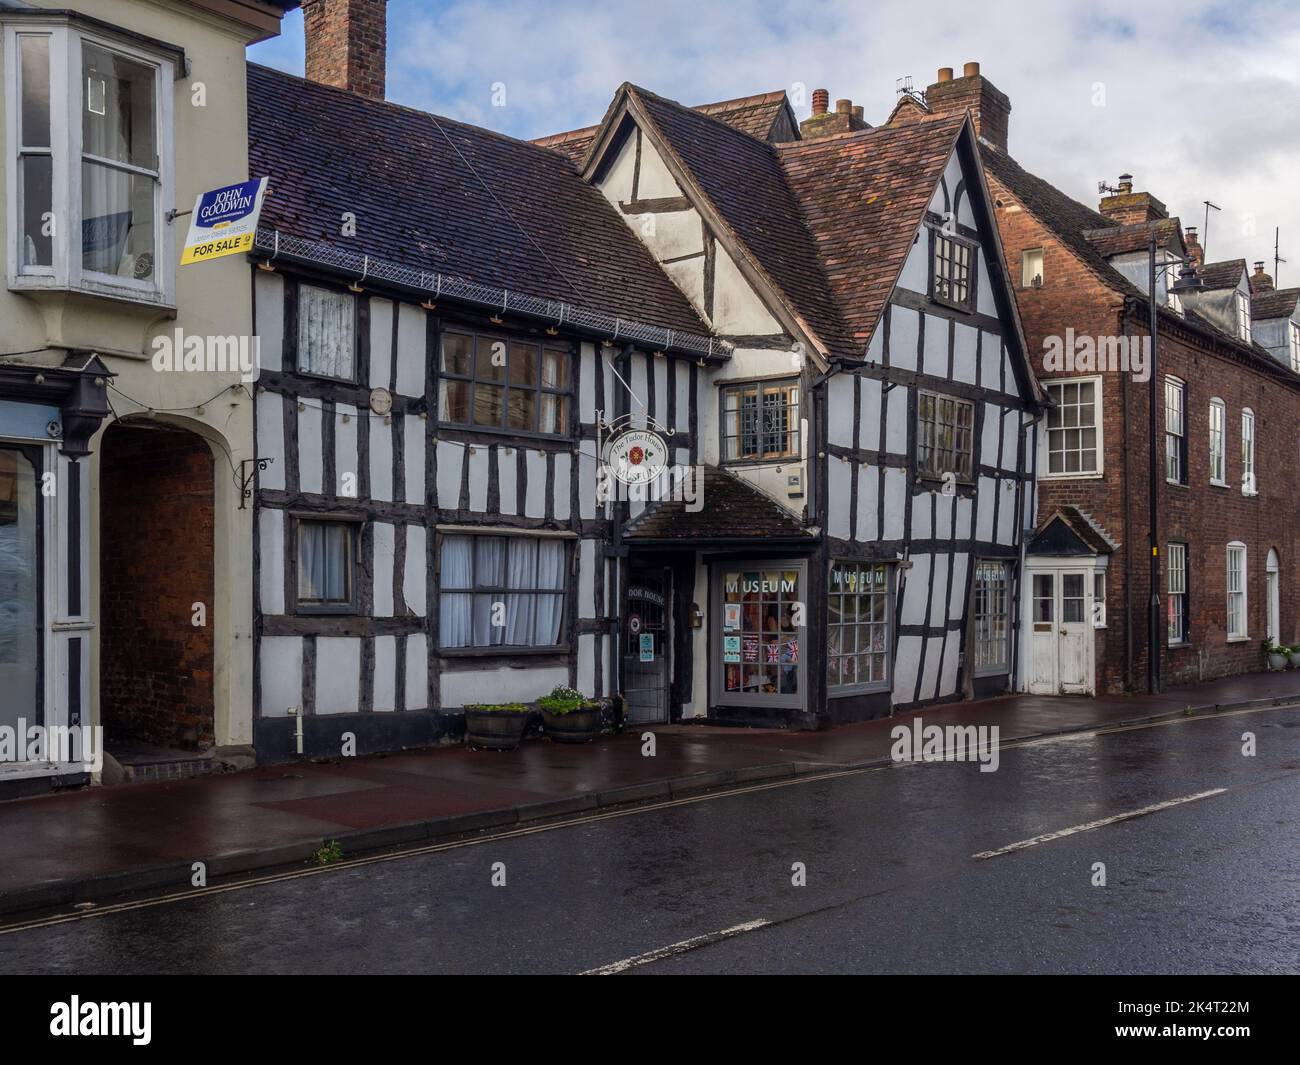 Tudor House Museum, Upton Upon Severn, Worcestershire, UK; housed in a 17th century building and exhibiting local and historic objects Stock Photo